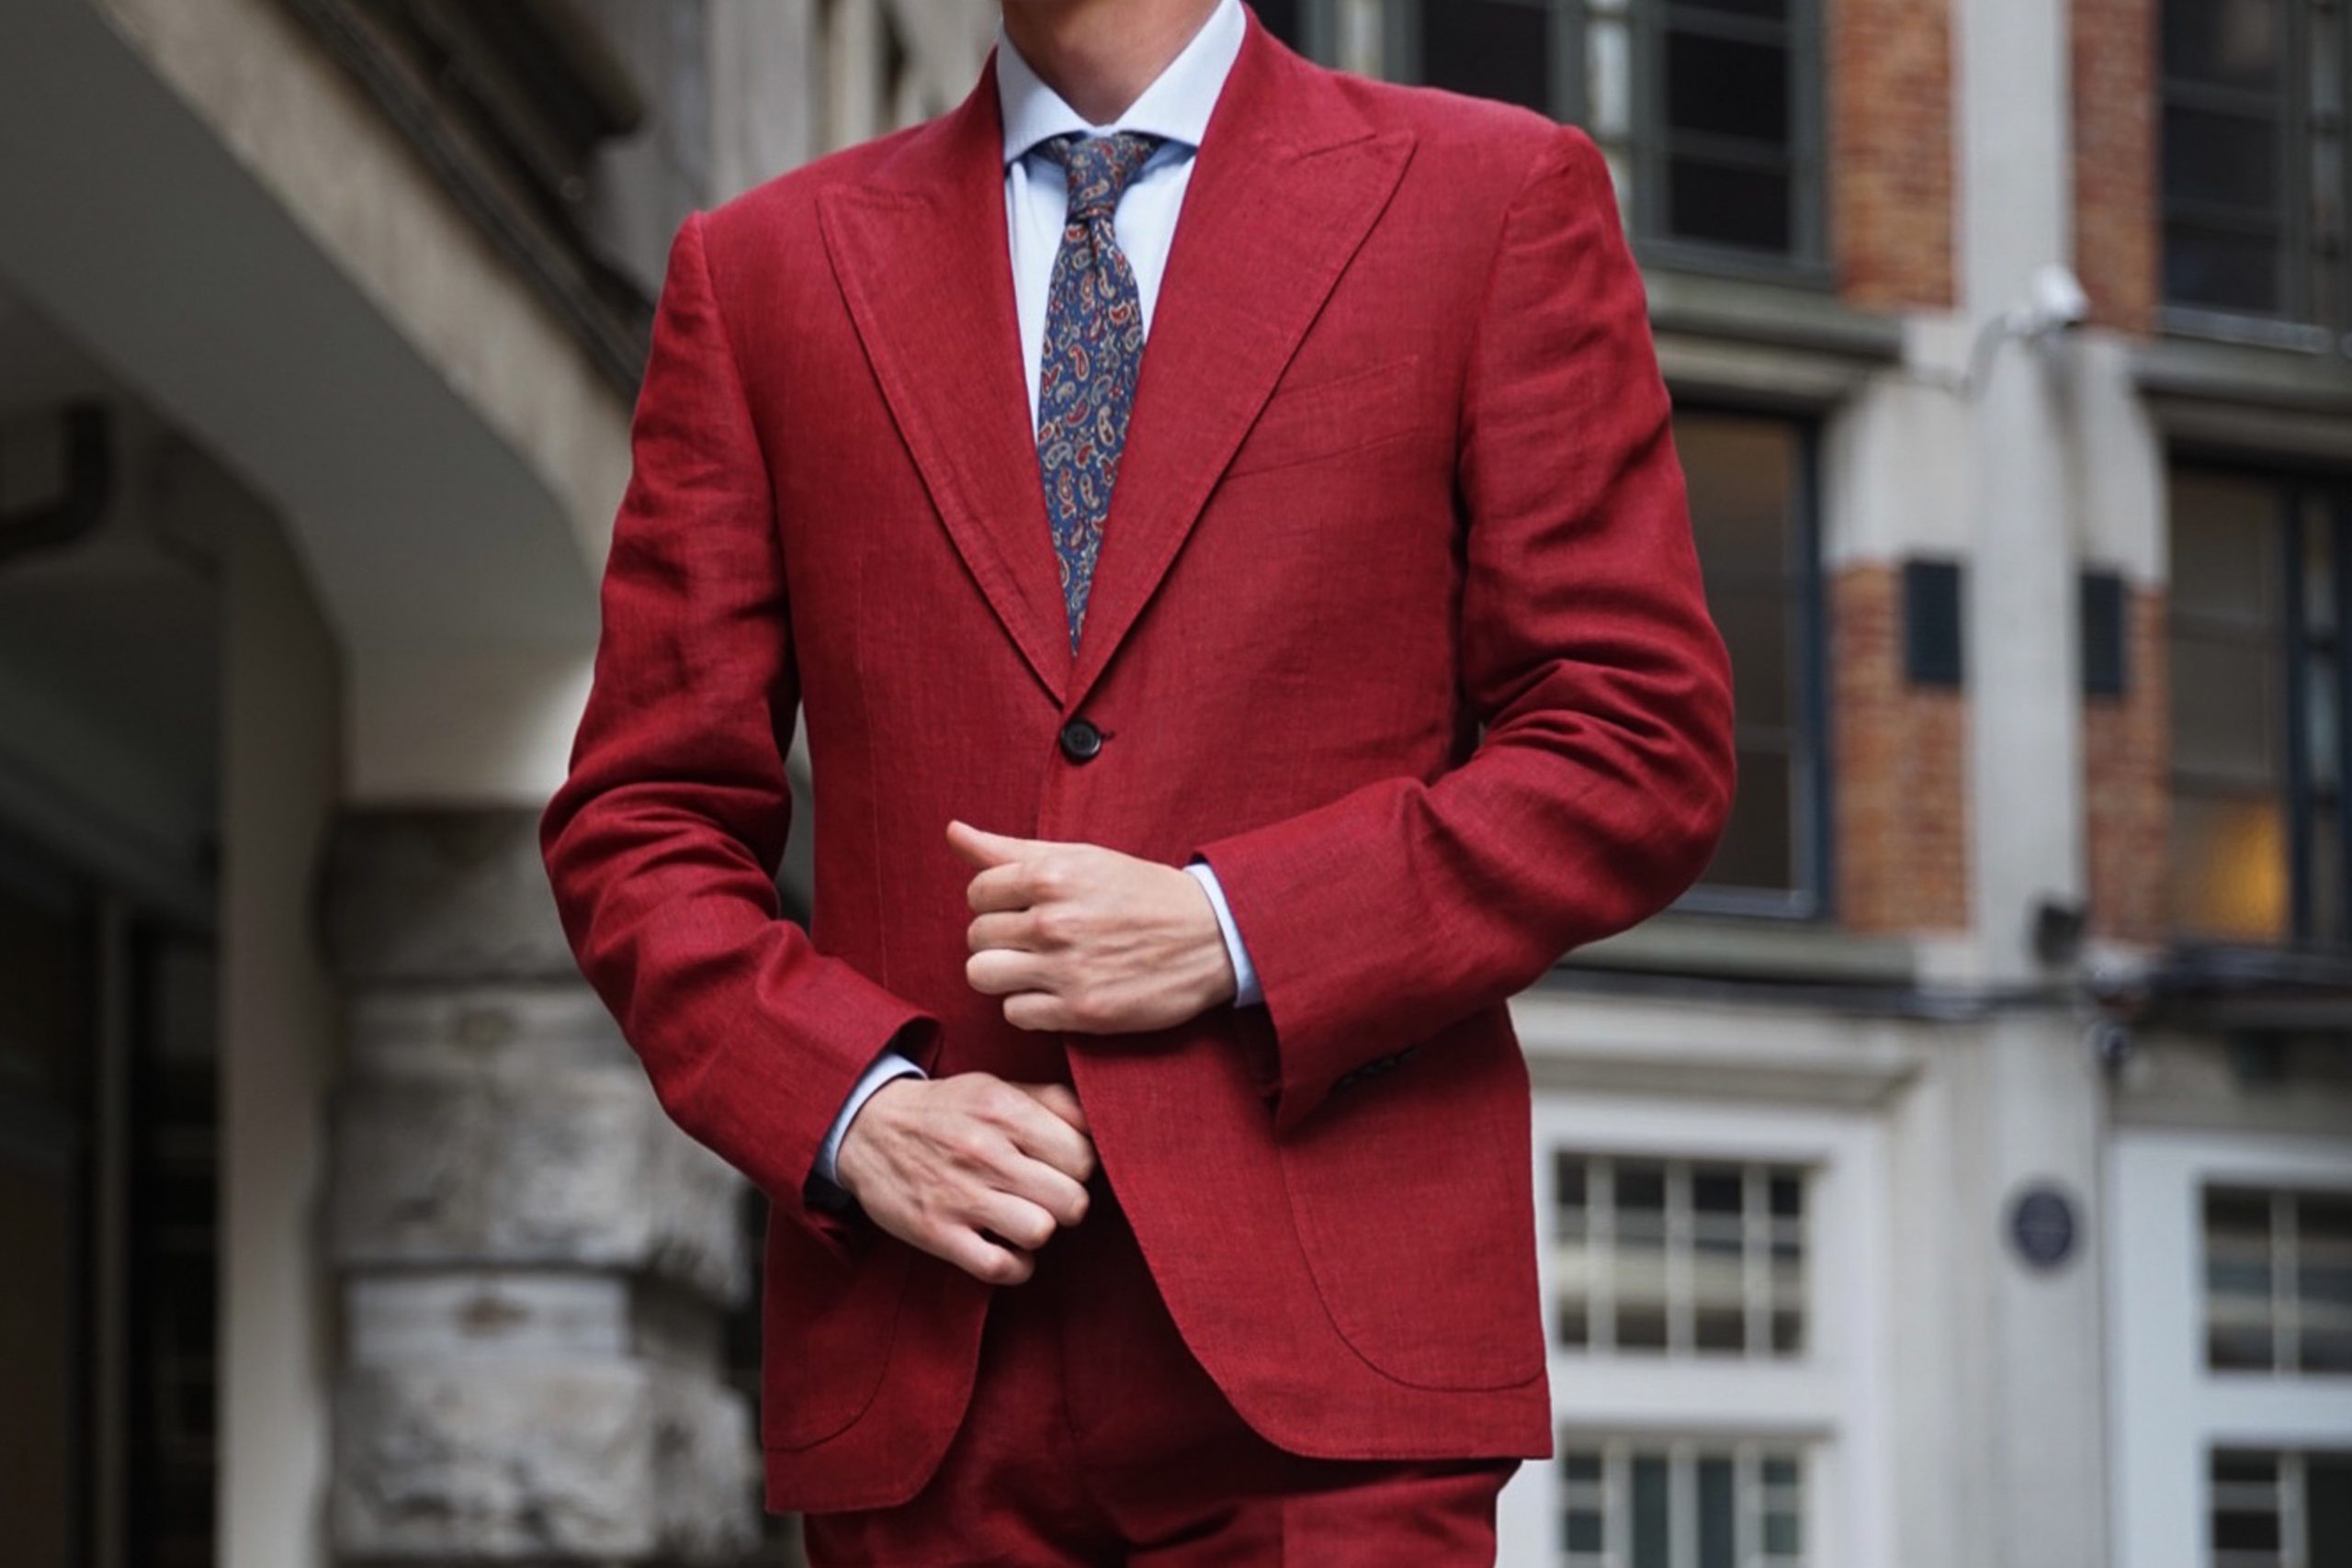 Man wearing bespoke linen red suit with tie